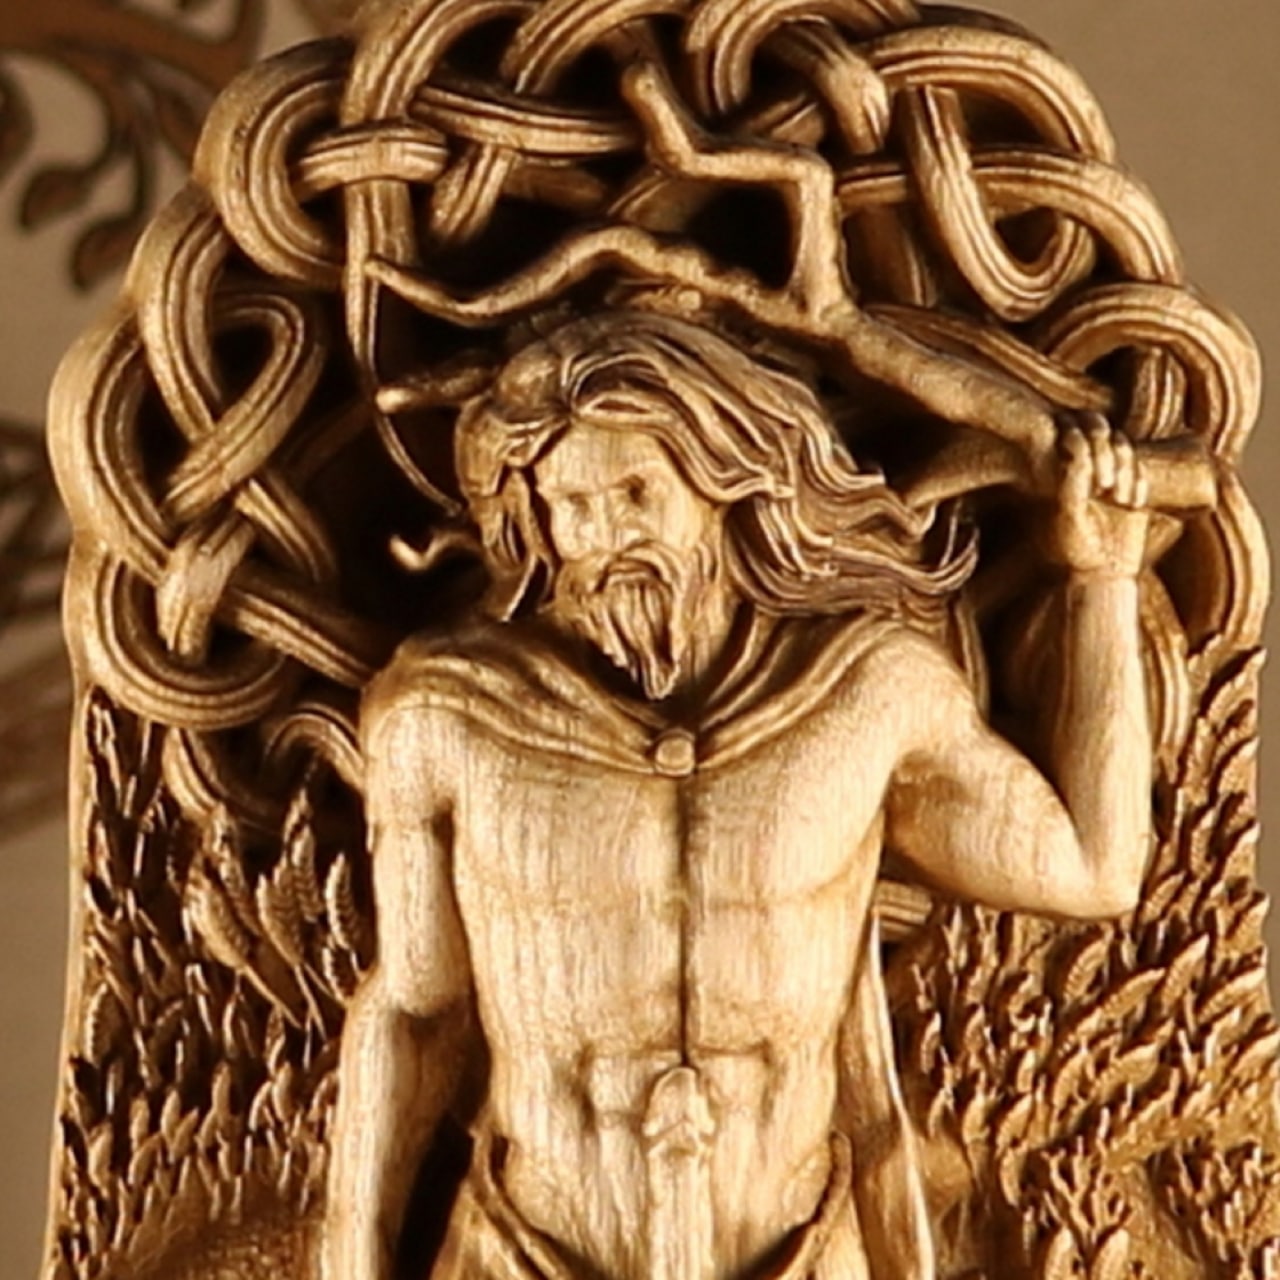 Carved Wooden Freyr Statue - Norse Pagan Decor